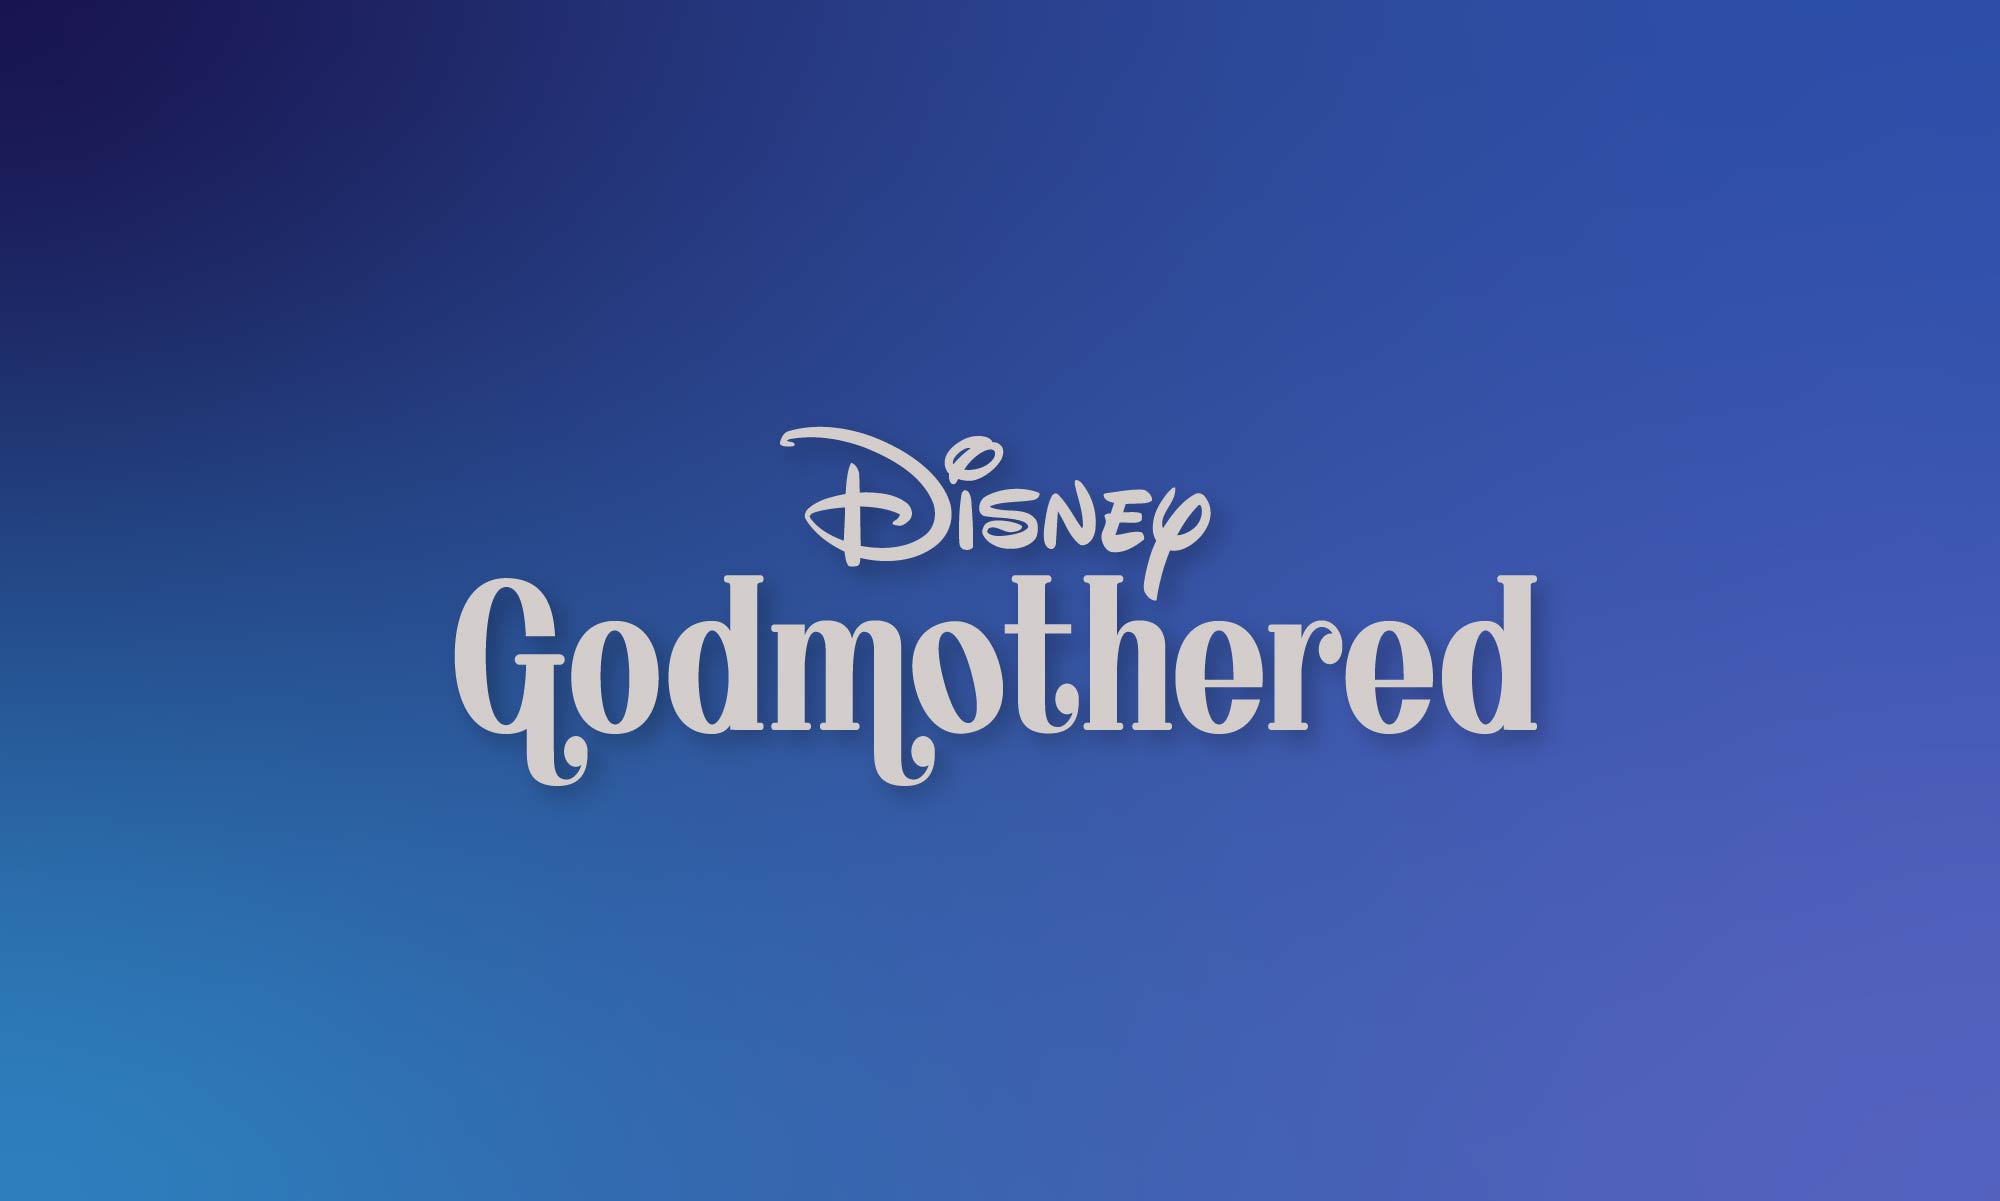 Godmothered Disney Title Treatment by Hoodzpah featuring storybook style lettering